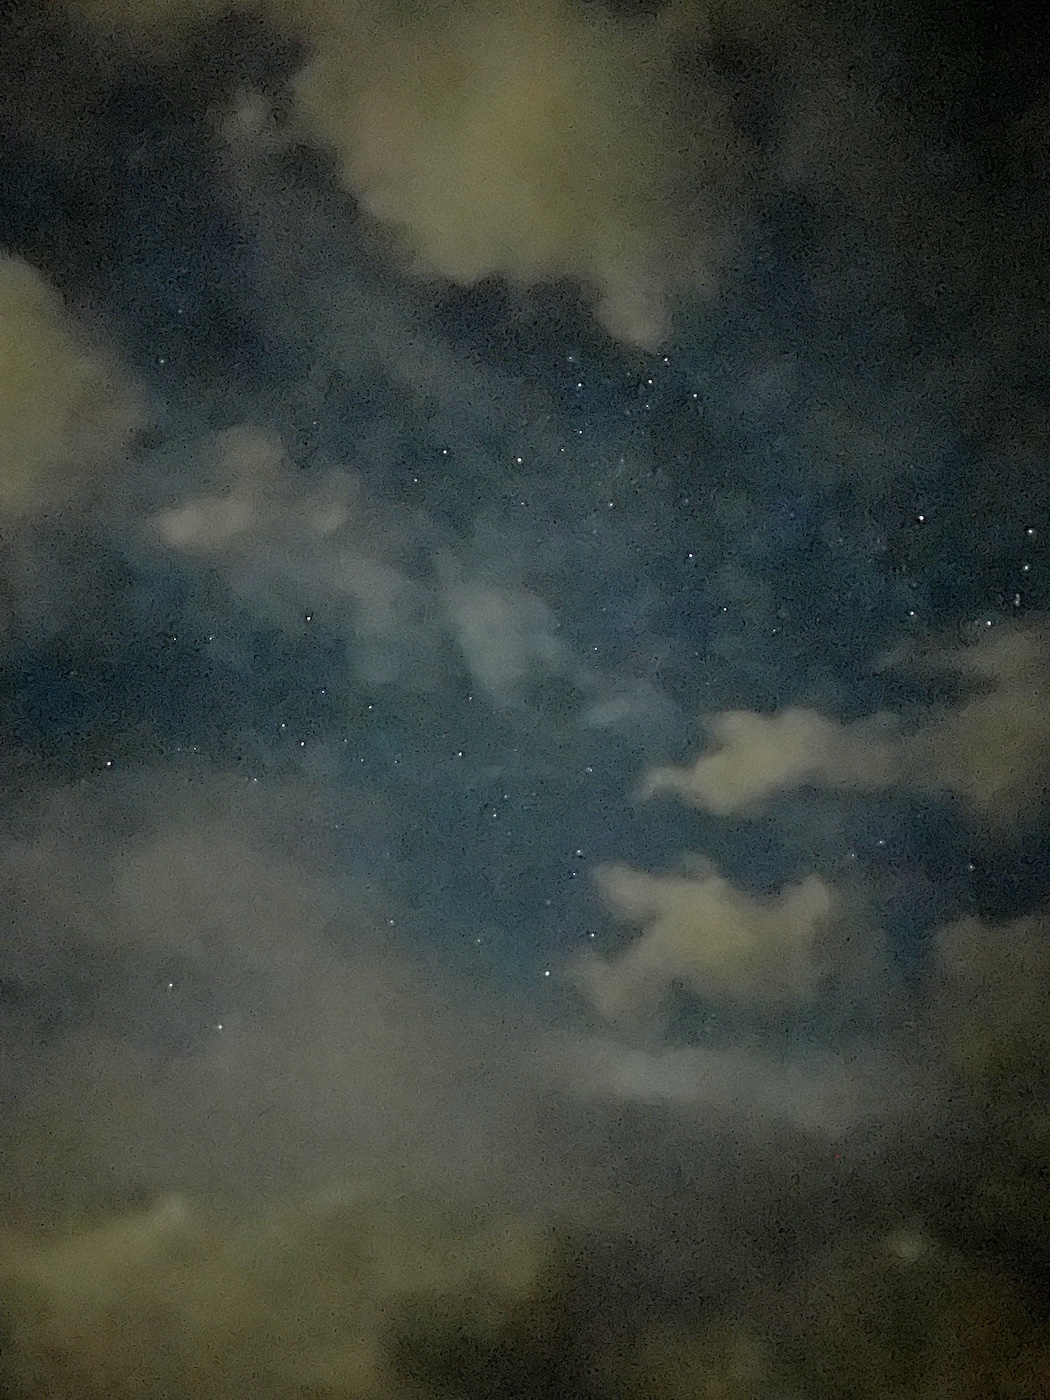 A shot of a starfield and clouds through my iphone camera